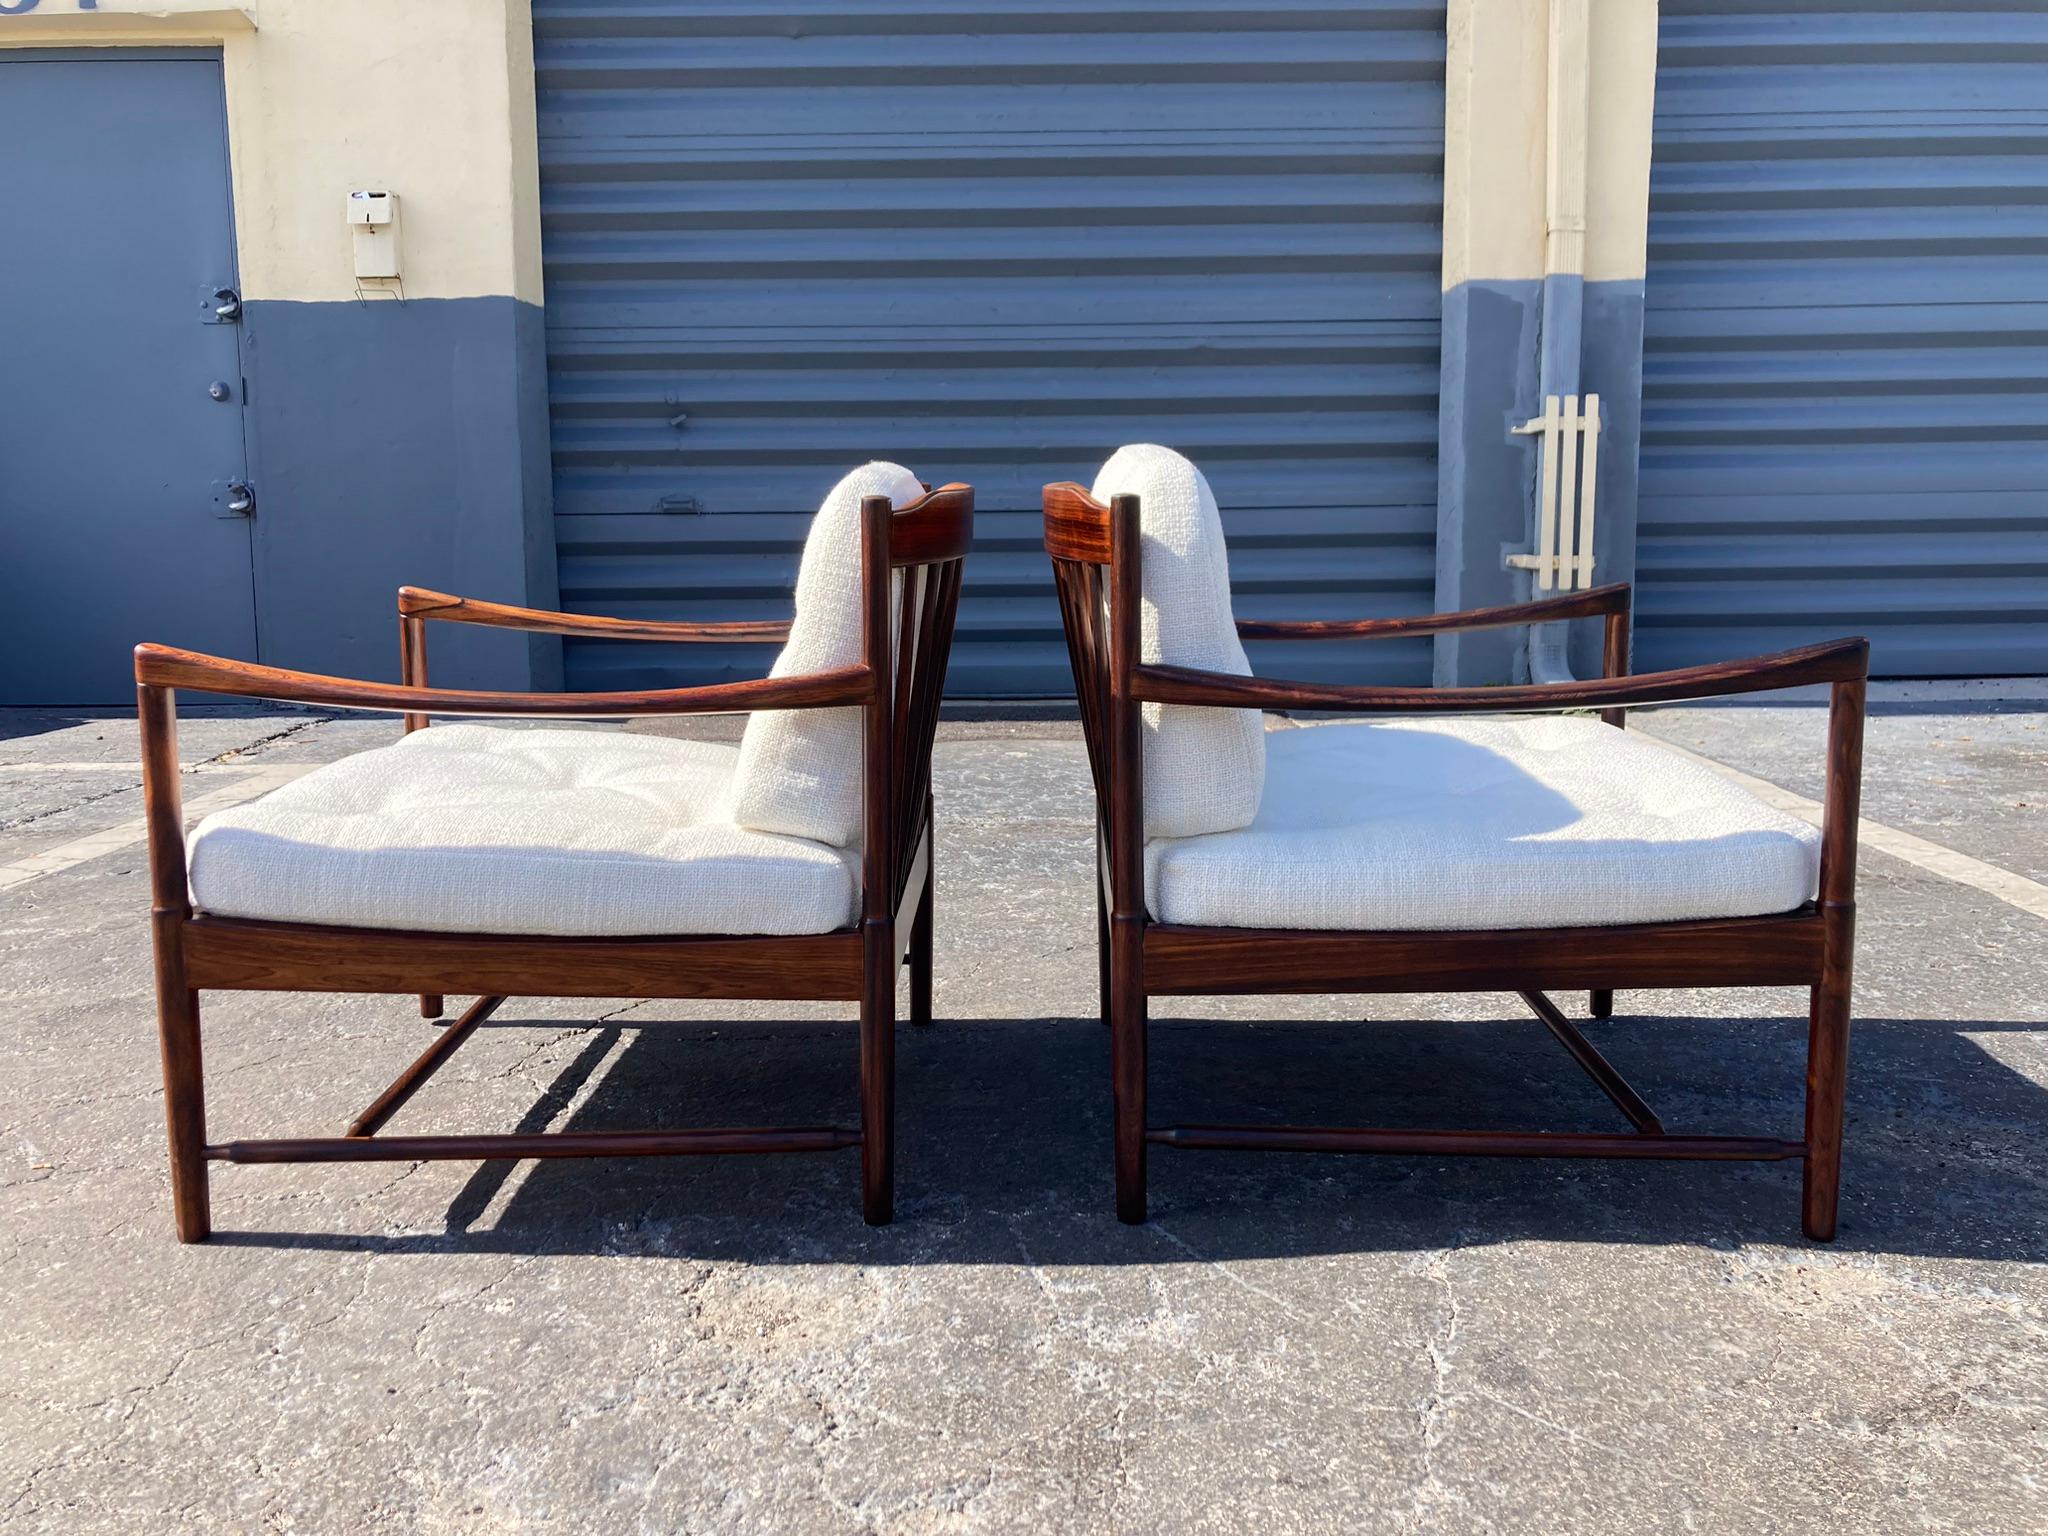 Fabric Pair of Rosewood Lounge Chairs Attributed to Kofod Larsen, Danish Modern For Sale